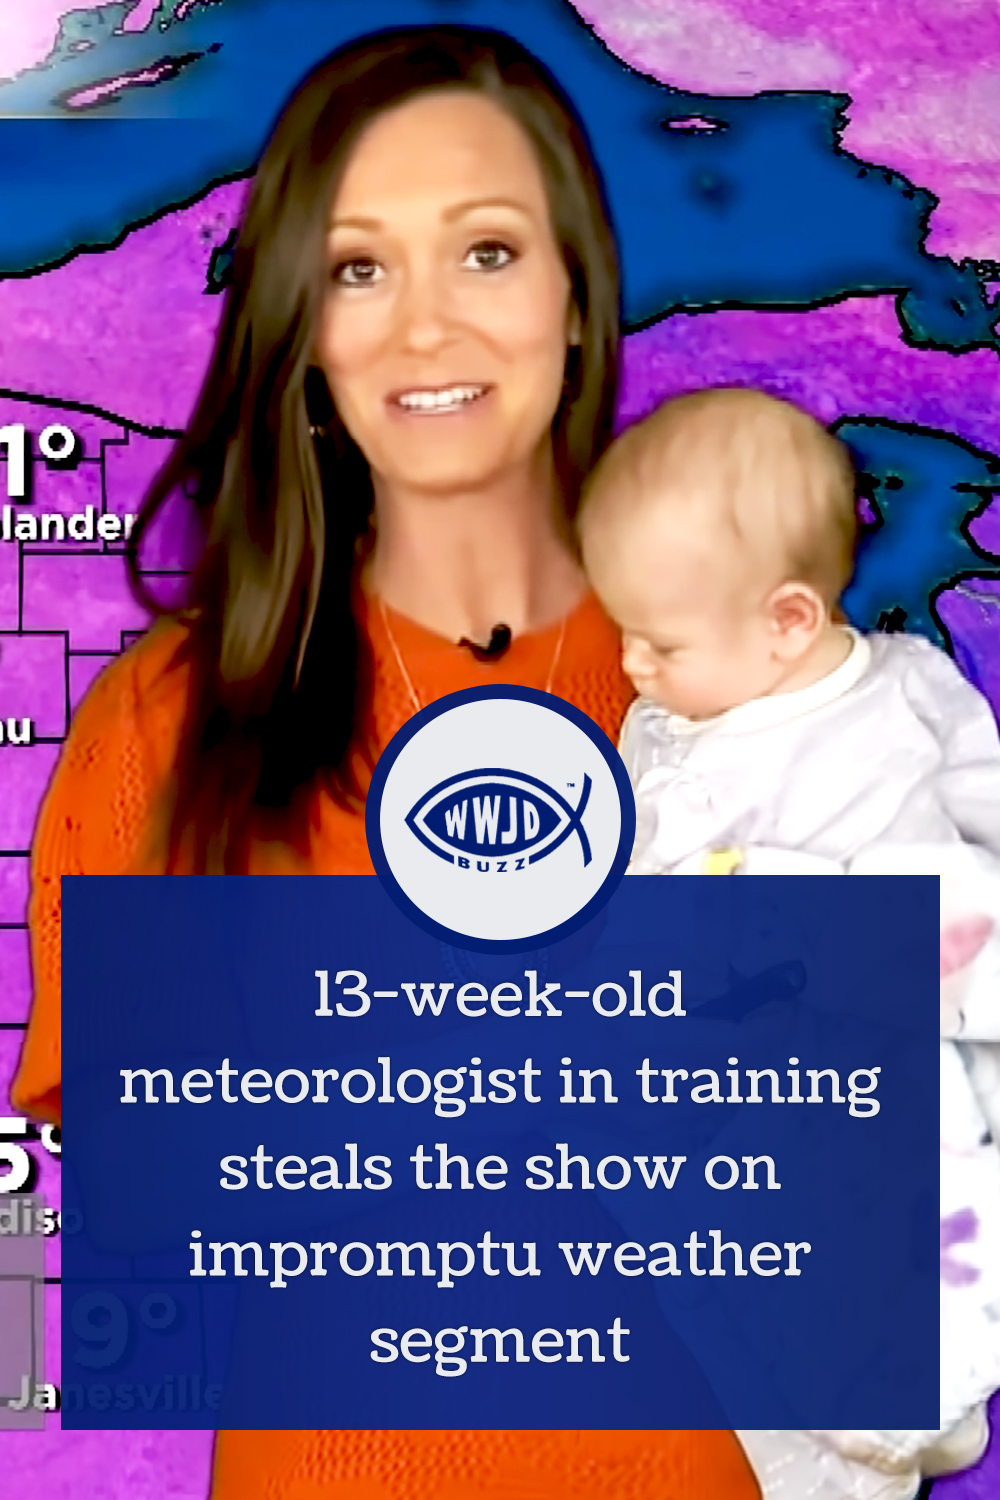 13-week-old meteorologist in training steals the show on impromptu weather segment